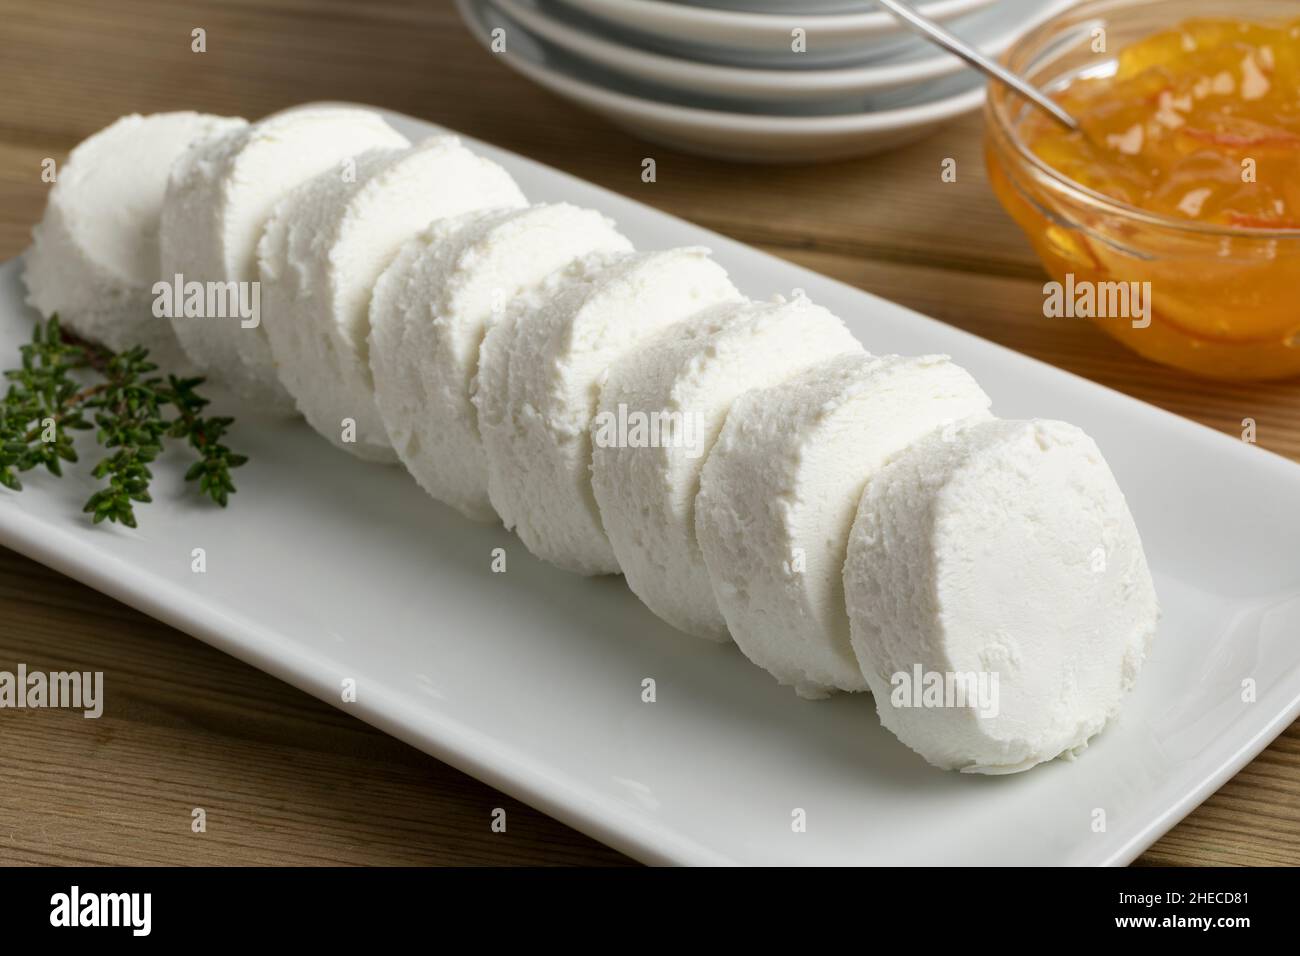 Row of white soft small goat cheese on a plate for a snack with sweet marmalade for topping in the background Stock Photo